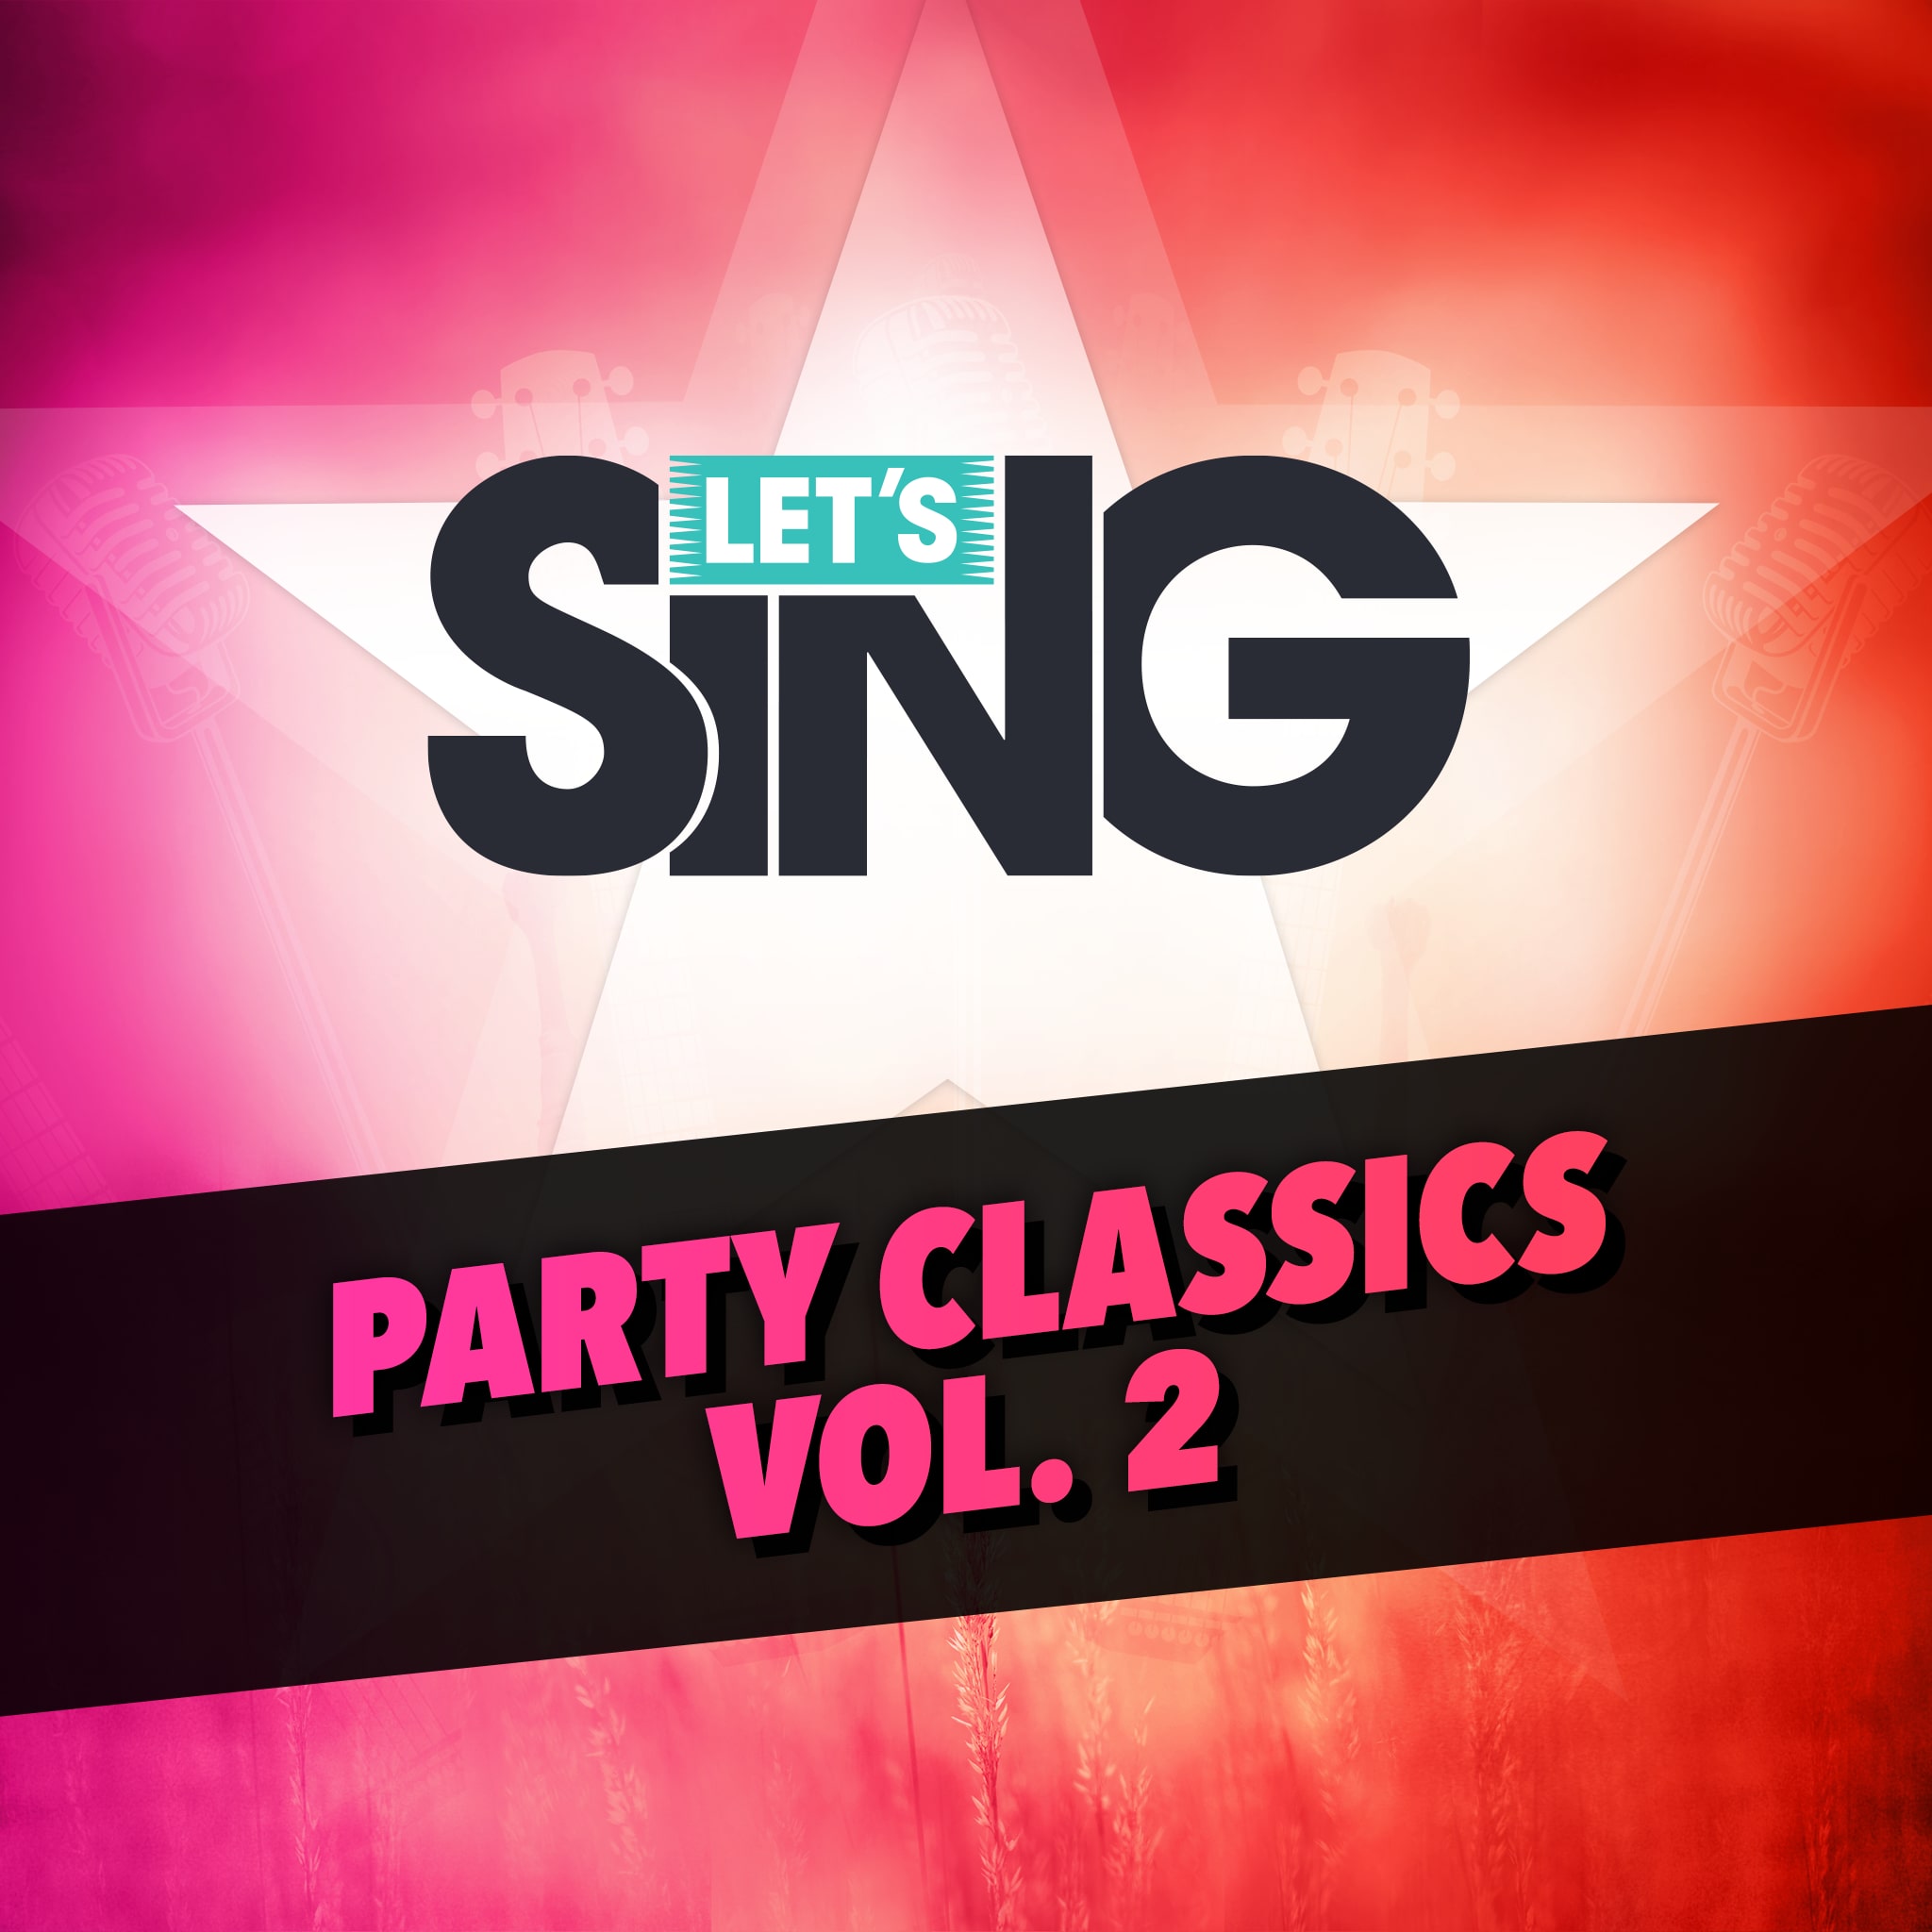 Let's Sing- Party Classics Vol. 2 Song Pack